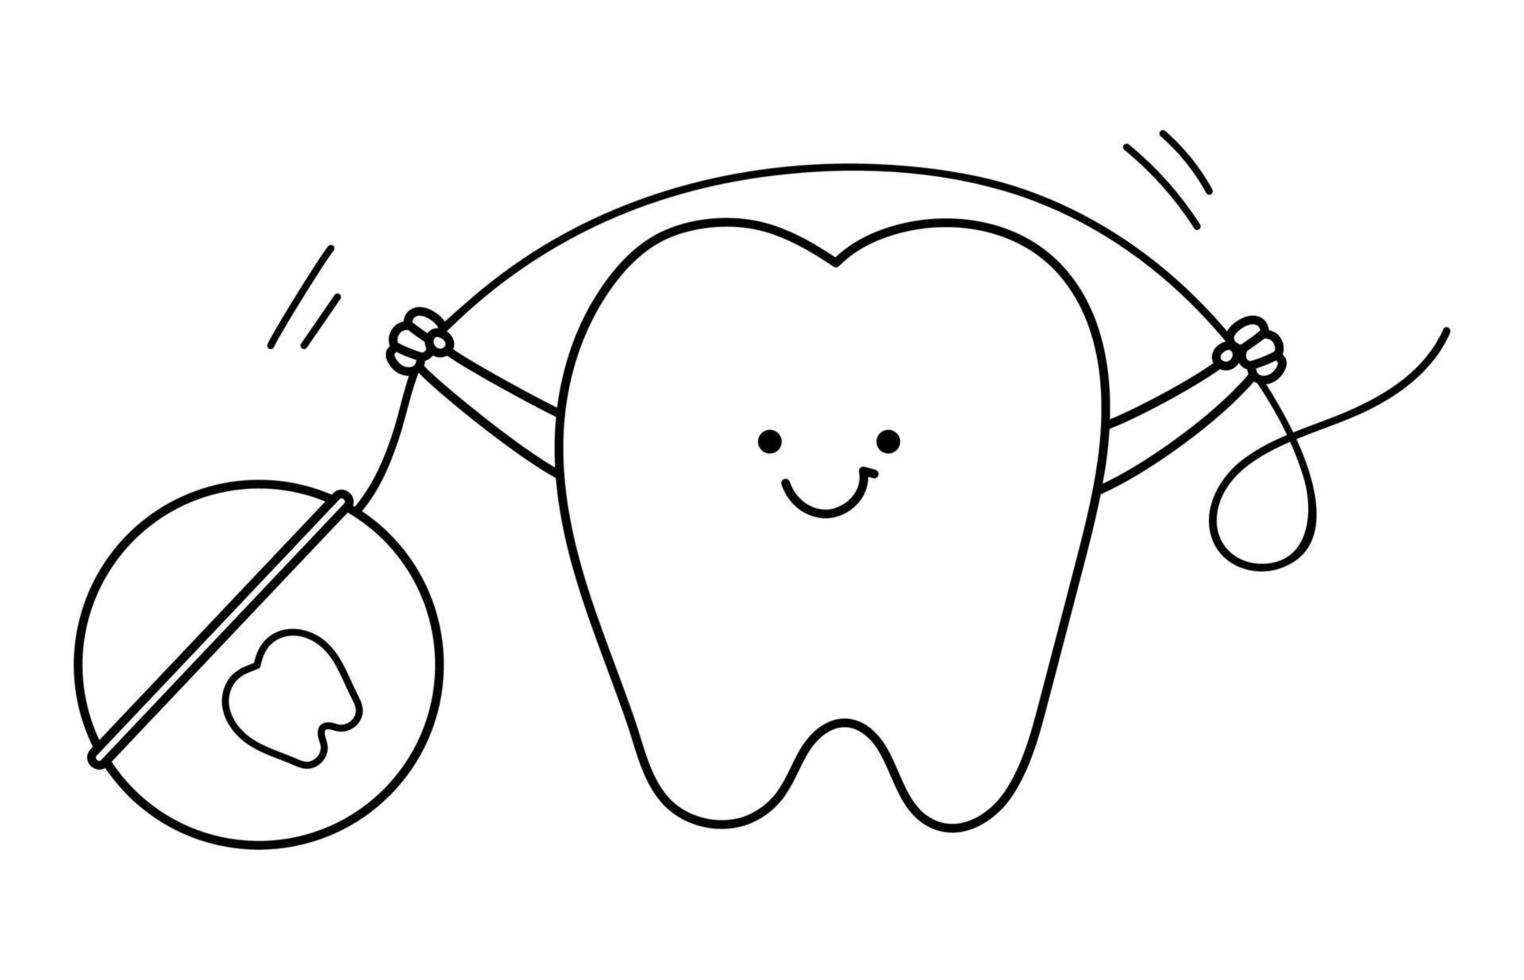 black and white kawaii tooth holding floss. Vector teeth line icon. Funny dental care picture for kids. Dentist baby clinic clipart or coloring page with mouth hygiene concept